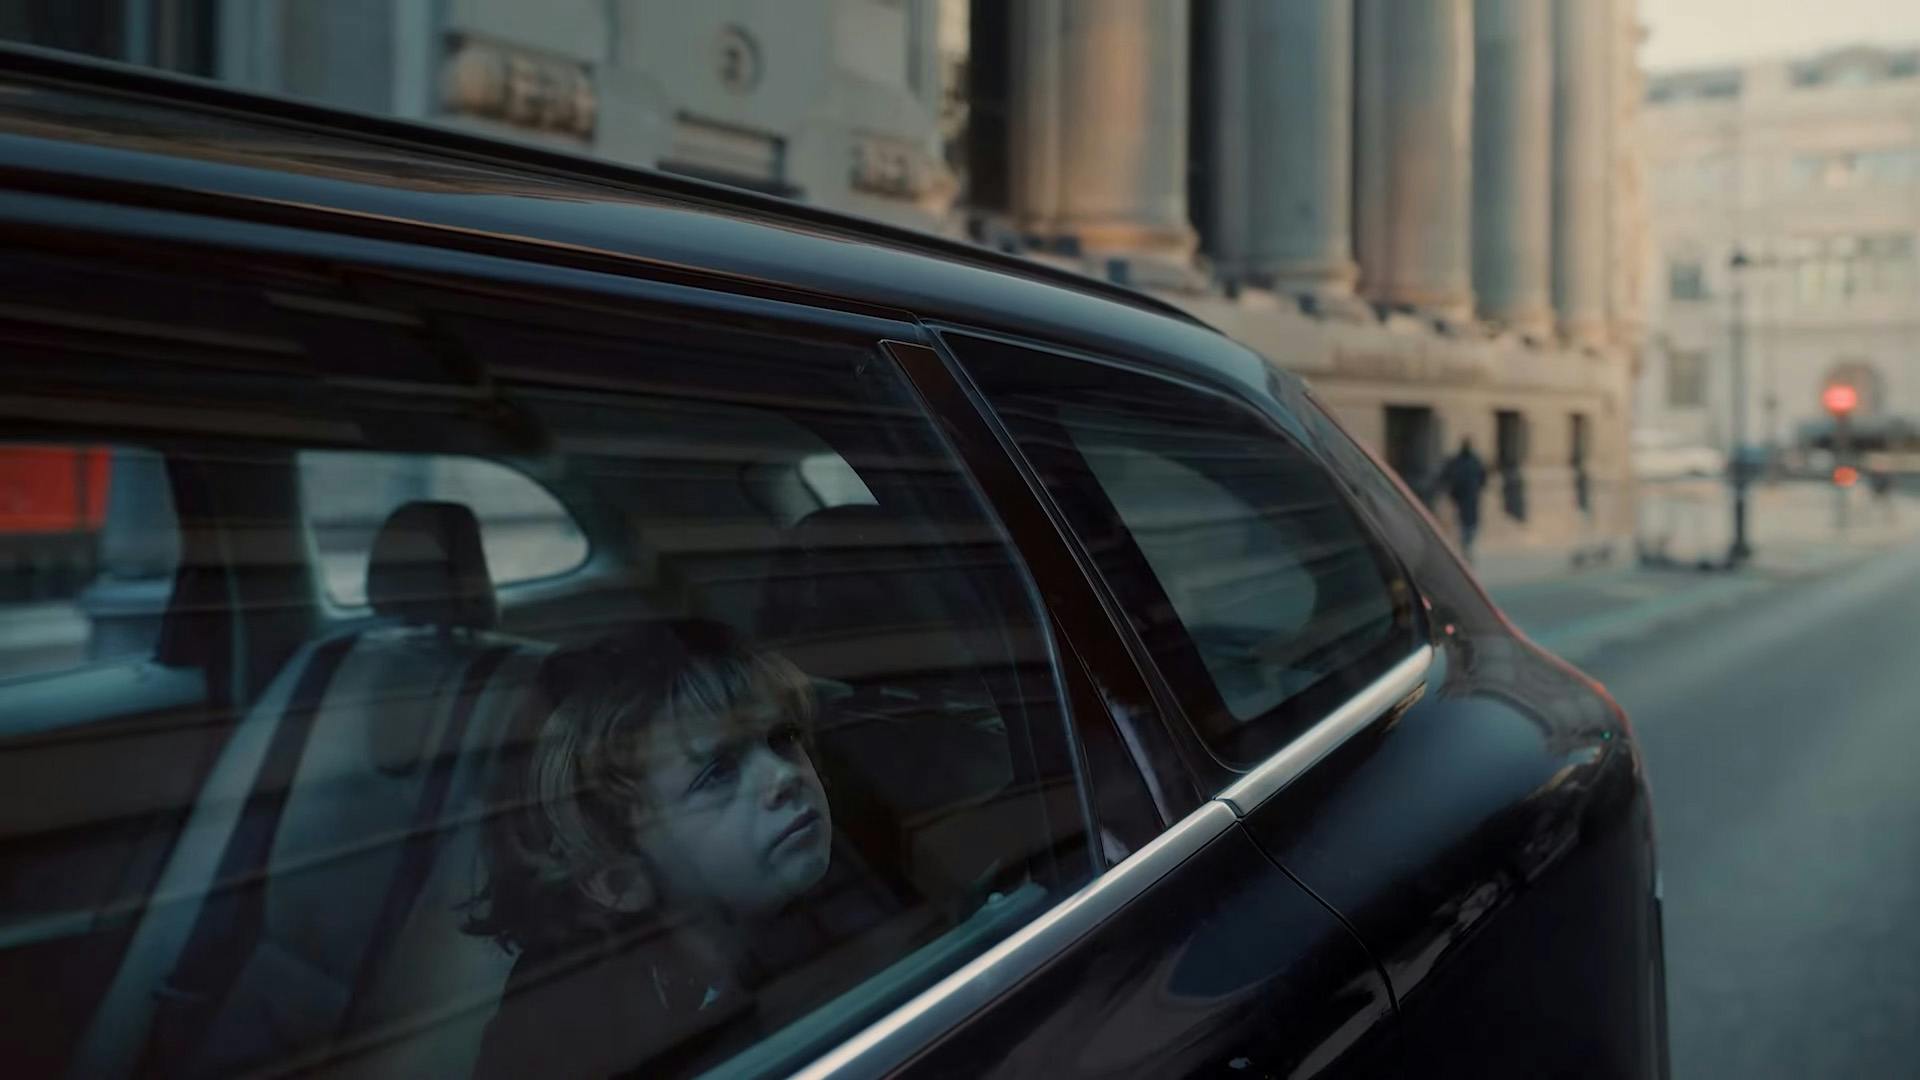 Image from Burger King campaign A Little More Confusing showing a child gazing out of the window of a black car driving through city streets. The image is taken from the outside